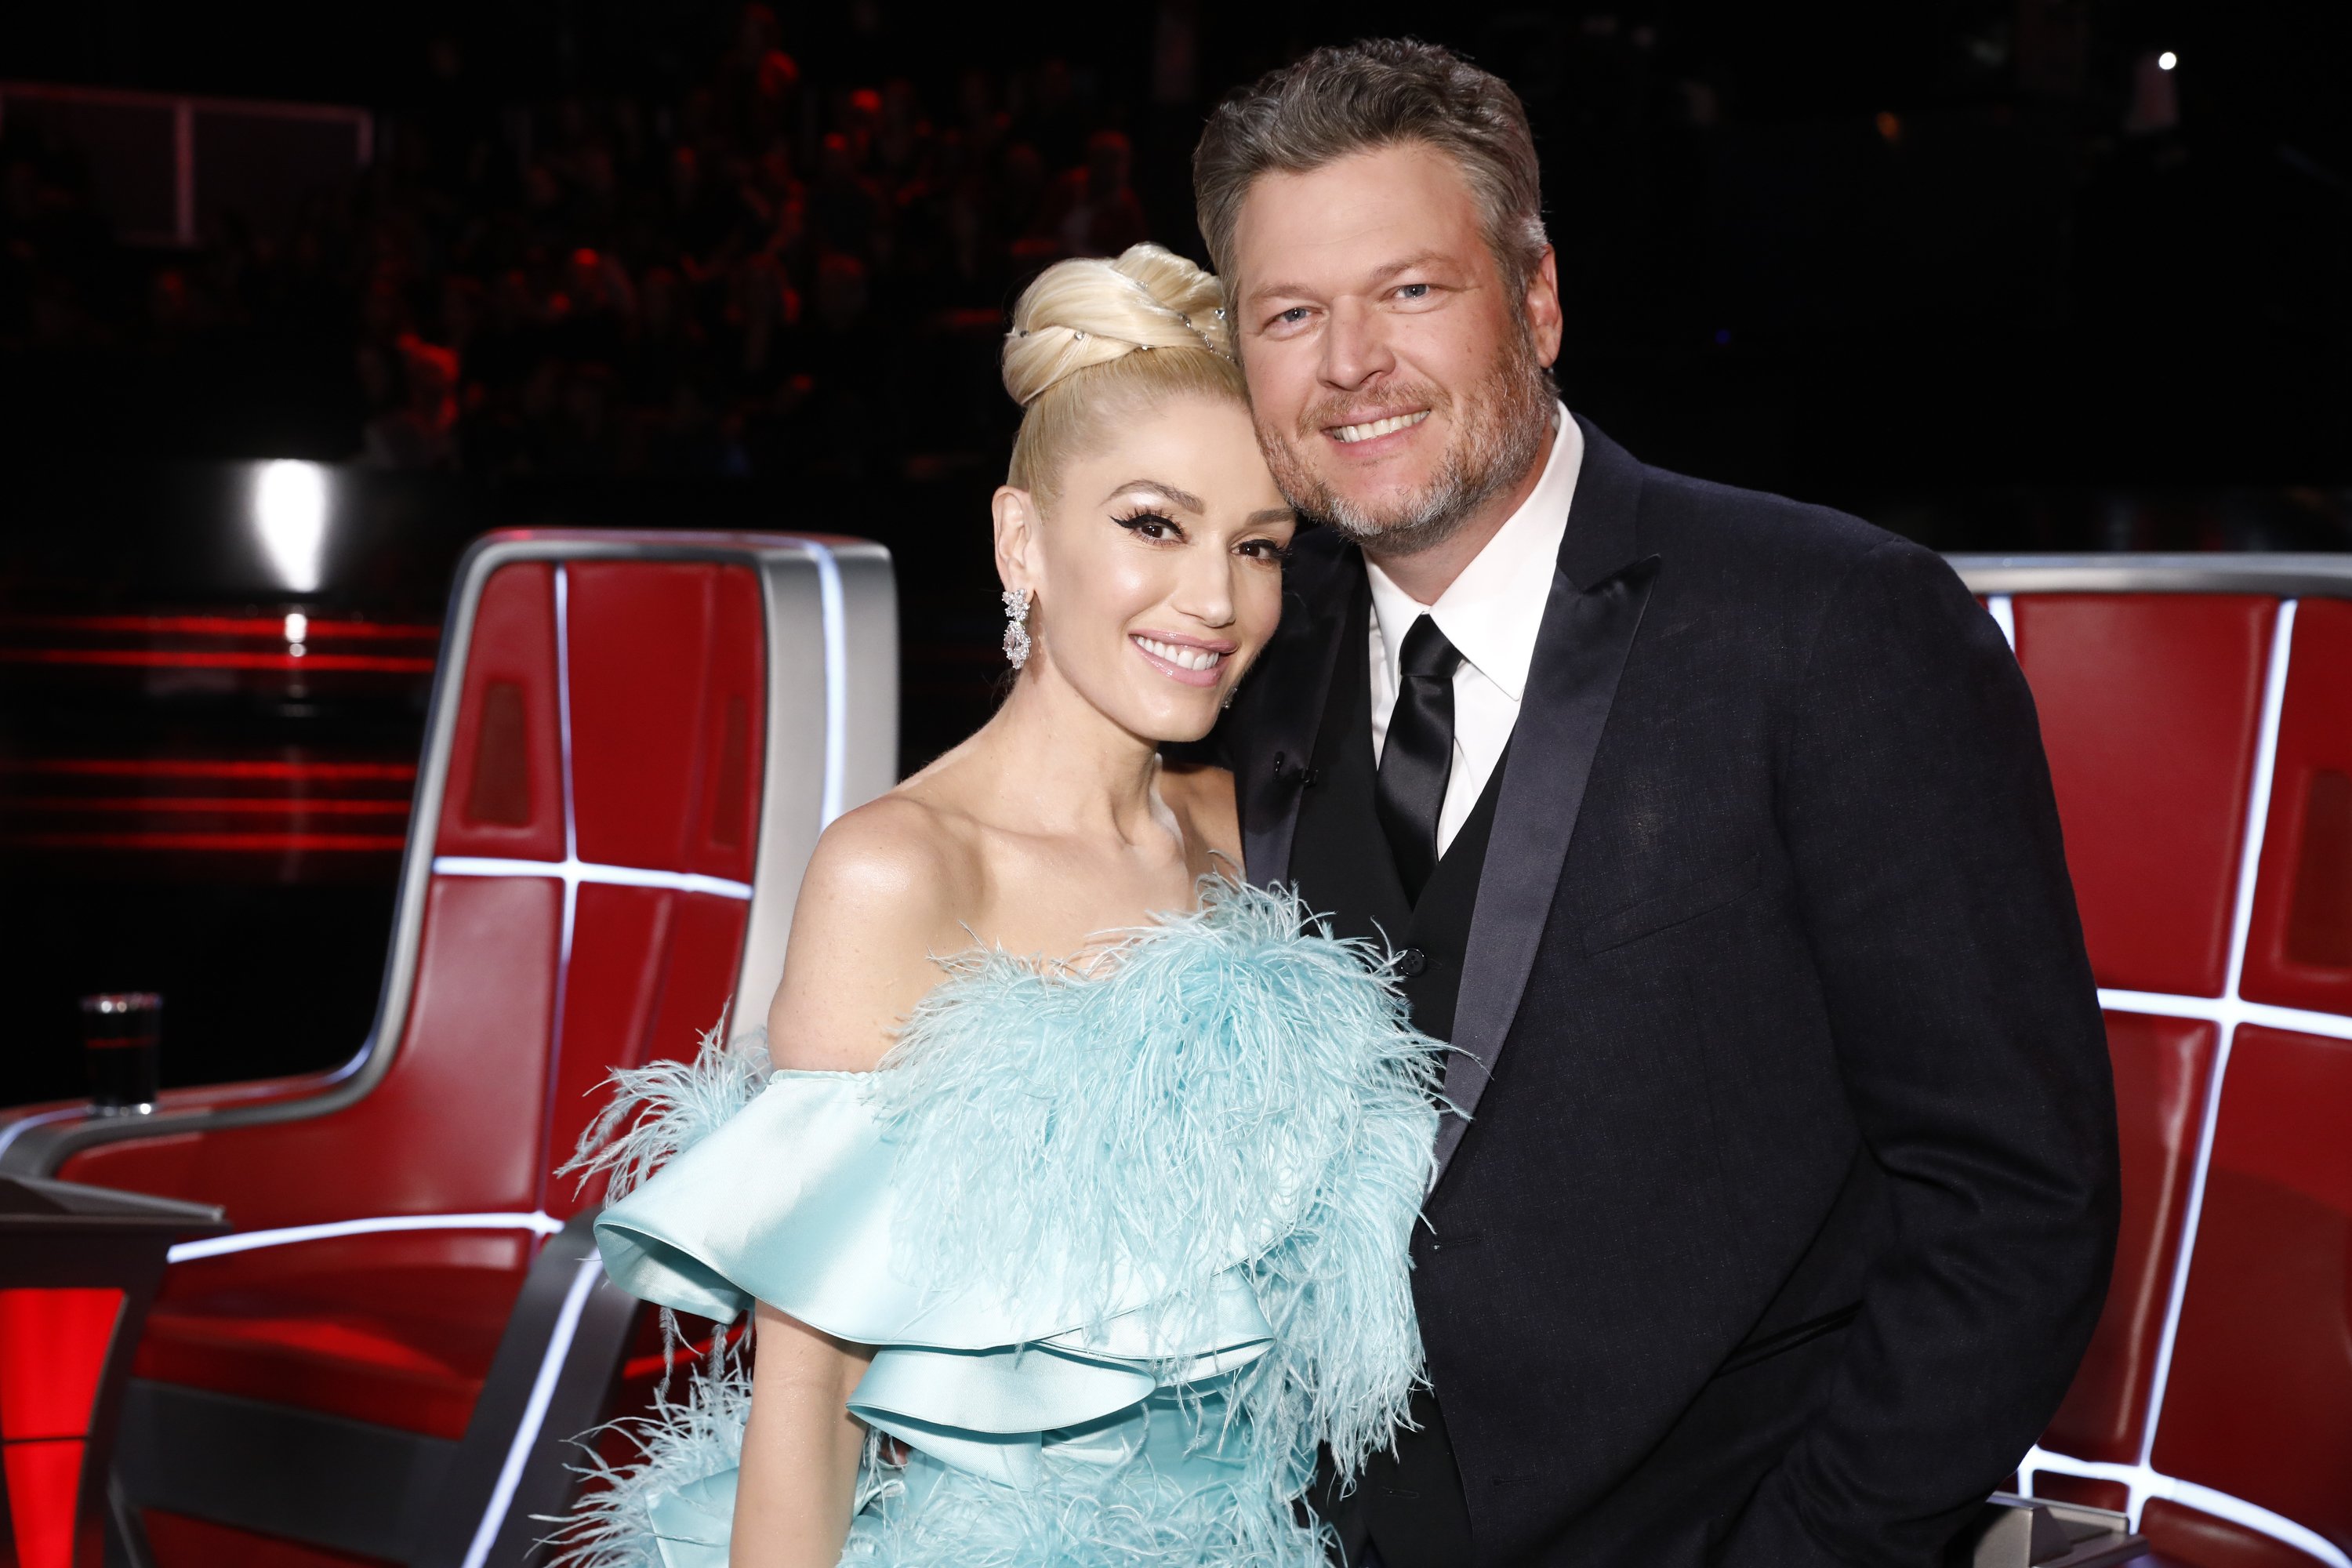 Gwen Stefani and Blake Shelton during the final episode of season 17 of "The Voice." | Source: Getty Images.